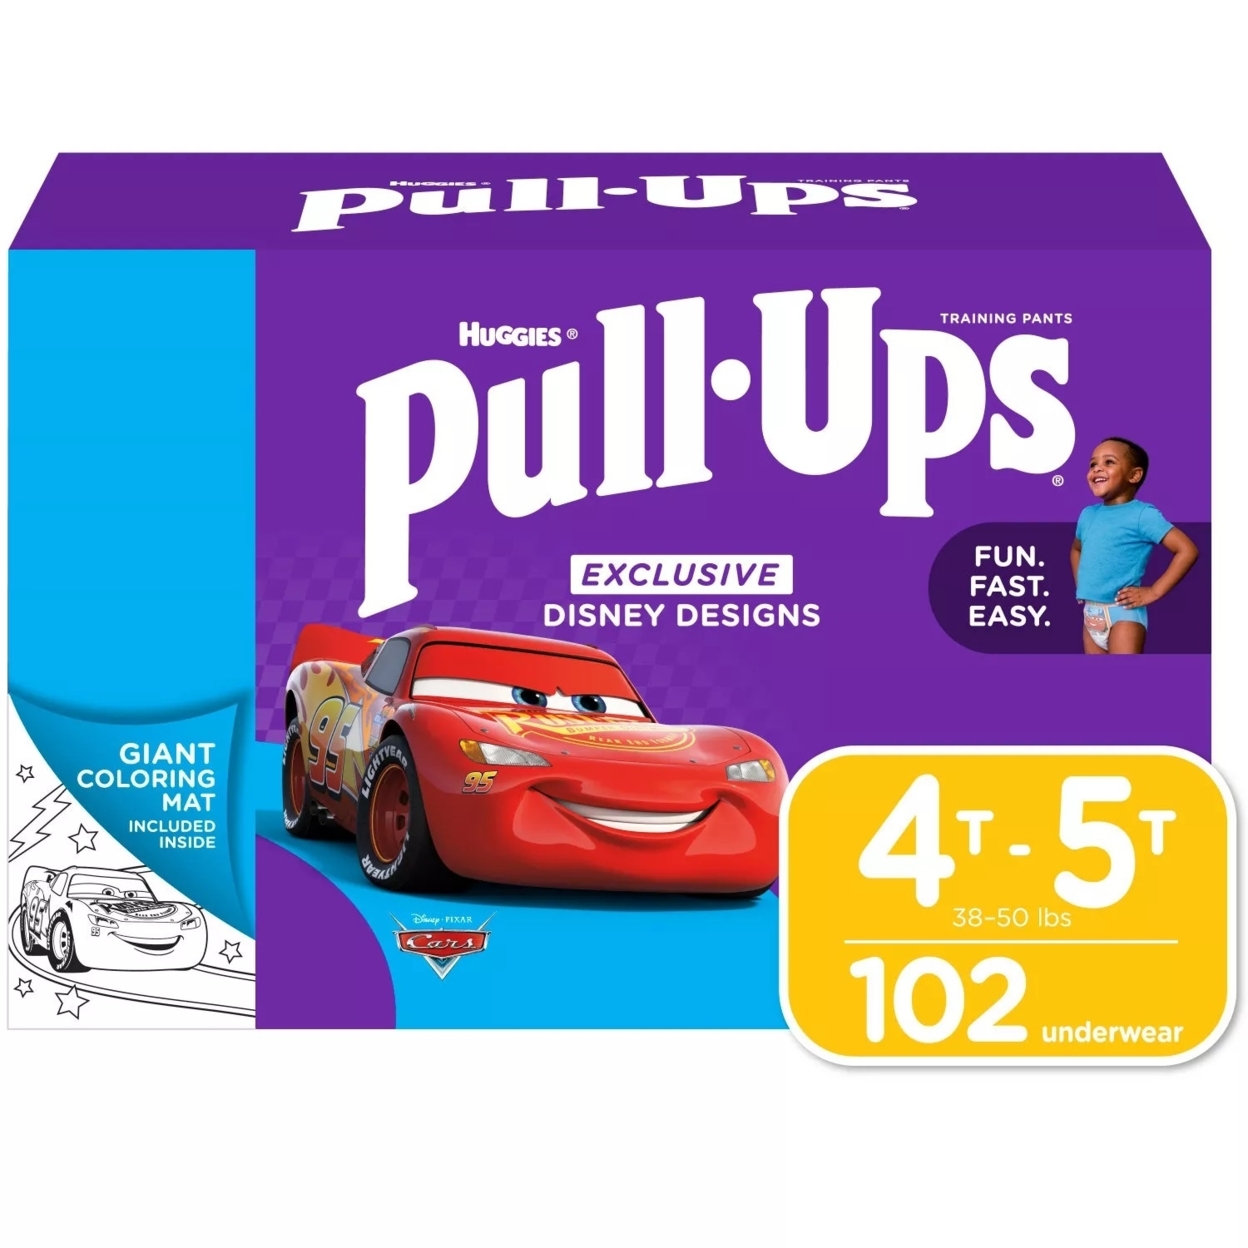 Huggies Pull-Ups Training Pants For Boys, 4T-5T 38-50 Pounds (102 Count)